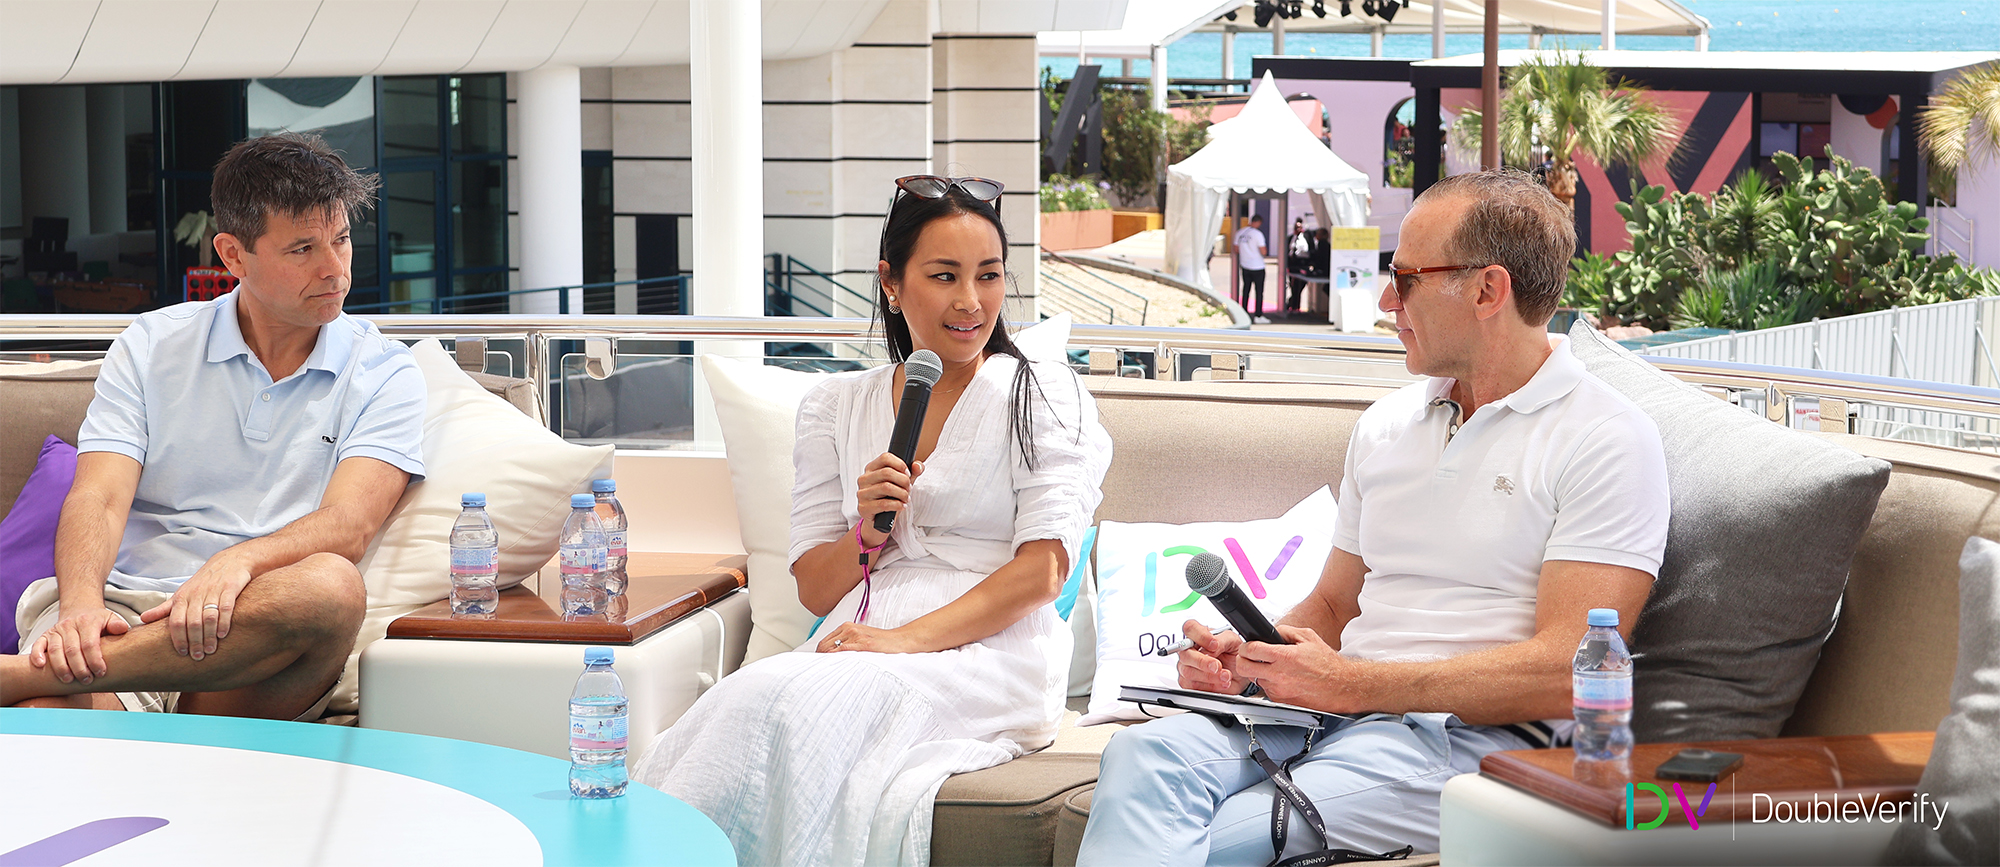 Photo taken on DV's yacht at the 2024 Cannes Lions International Festival of Creativity showing three panel members, including DV CEO Mark Zagorski, holding microphones and engaging in discussion.